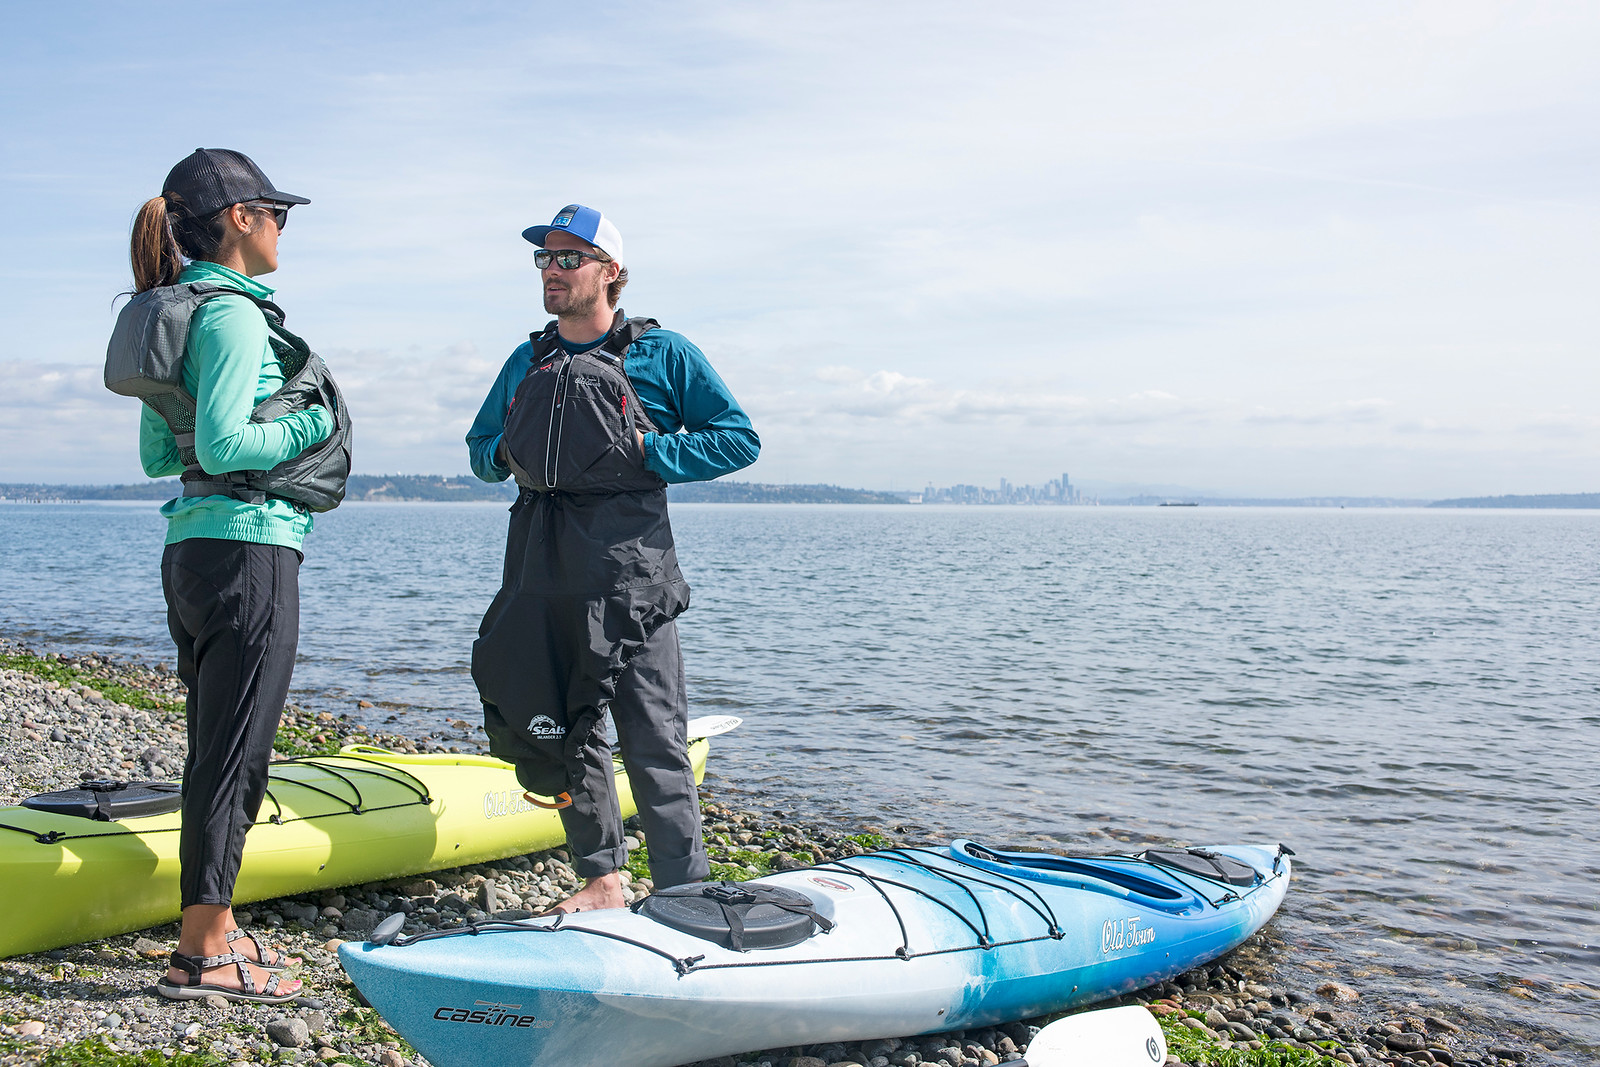 Kayak Gear and Accessories: Everything You Need To Go Kayaking